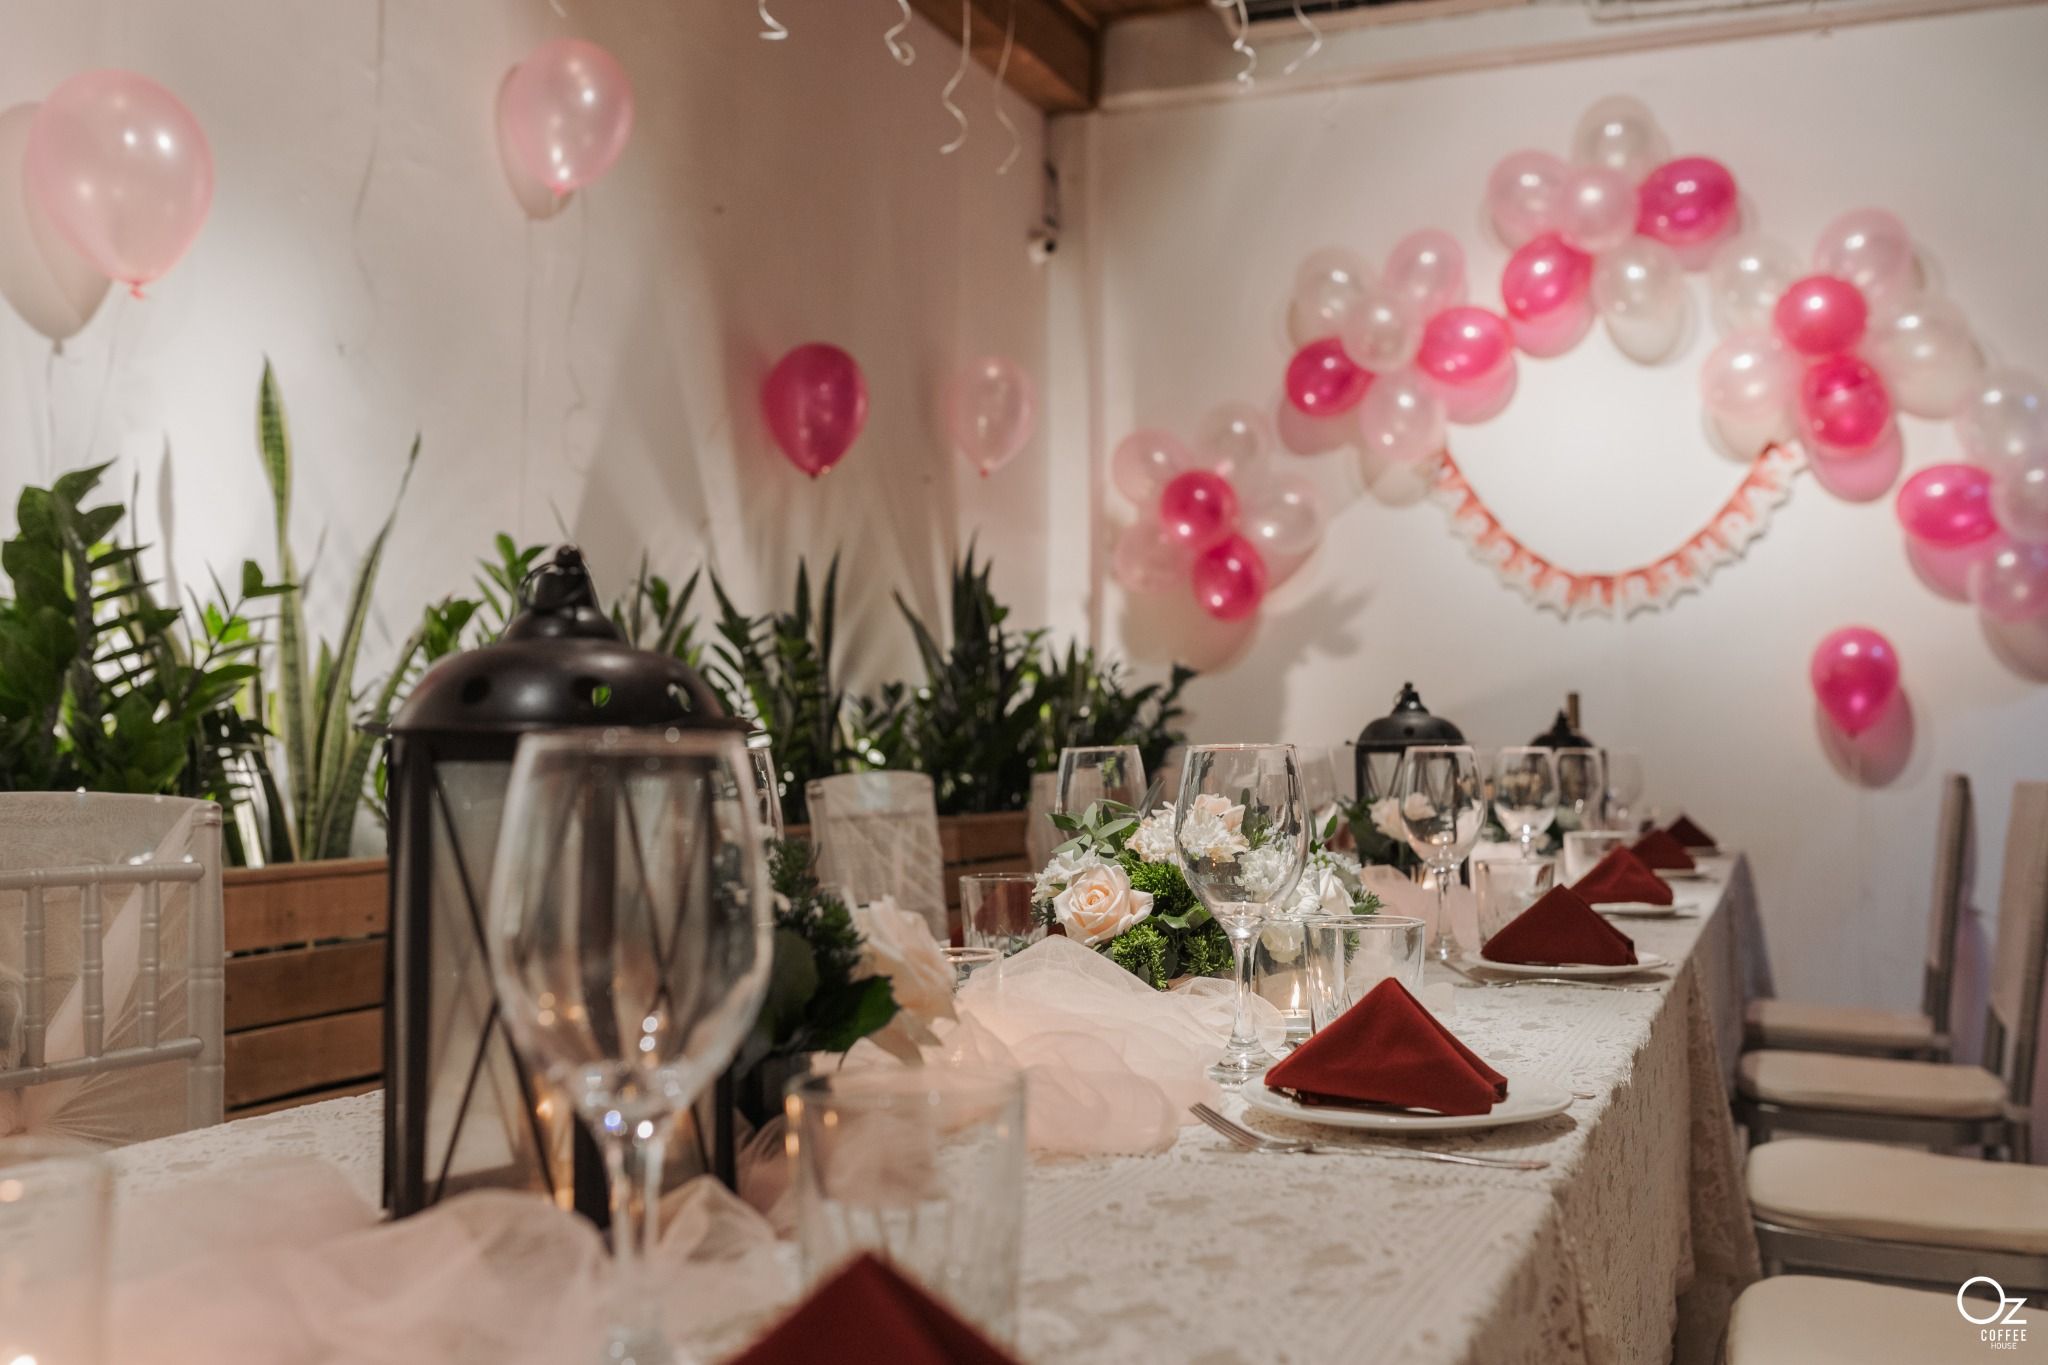 PRIVATE - CONCEPT SWEET - LIGHT ROOM - GROUP - OZ_LVS – Oz Coffee ...